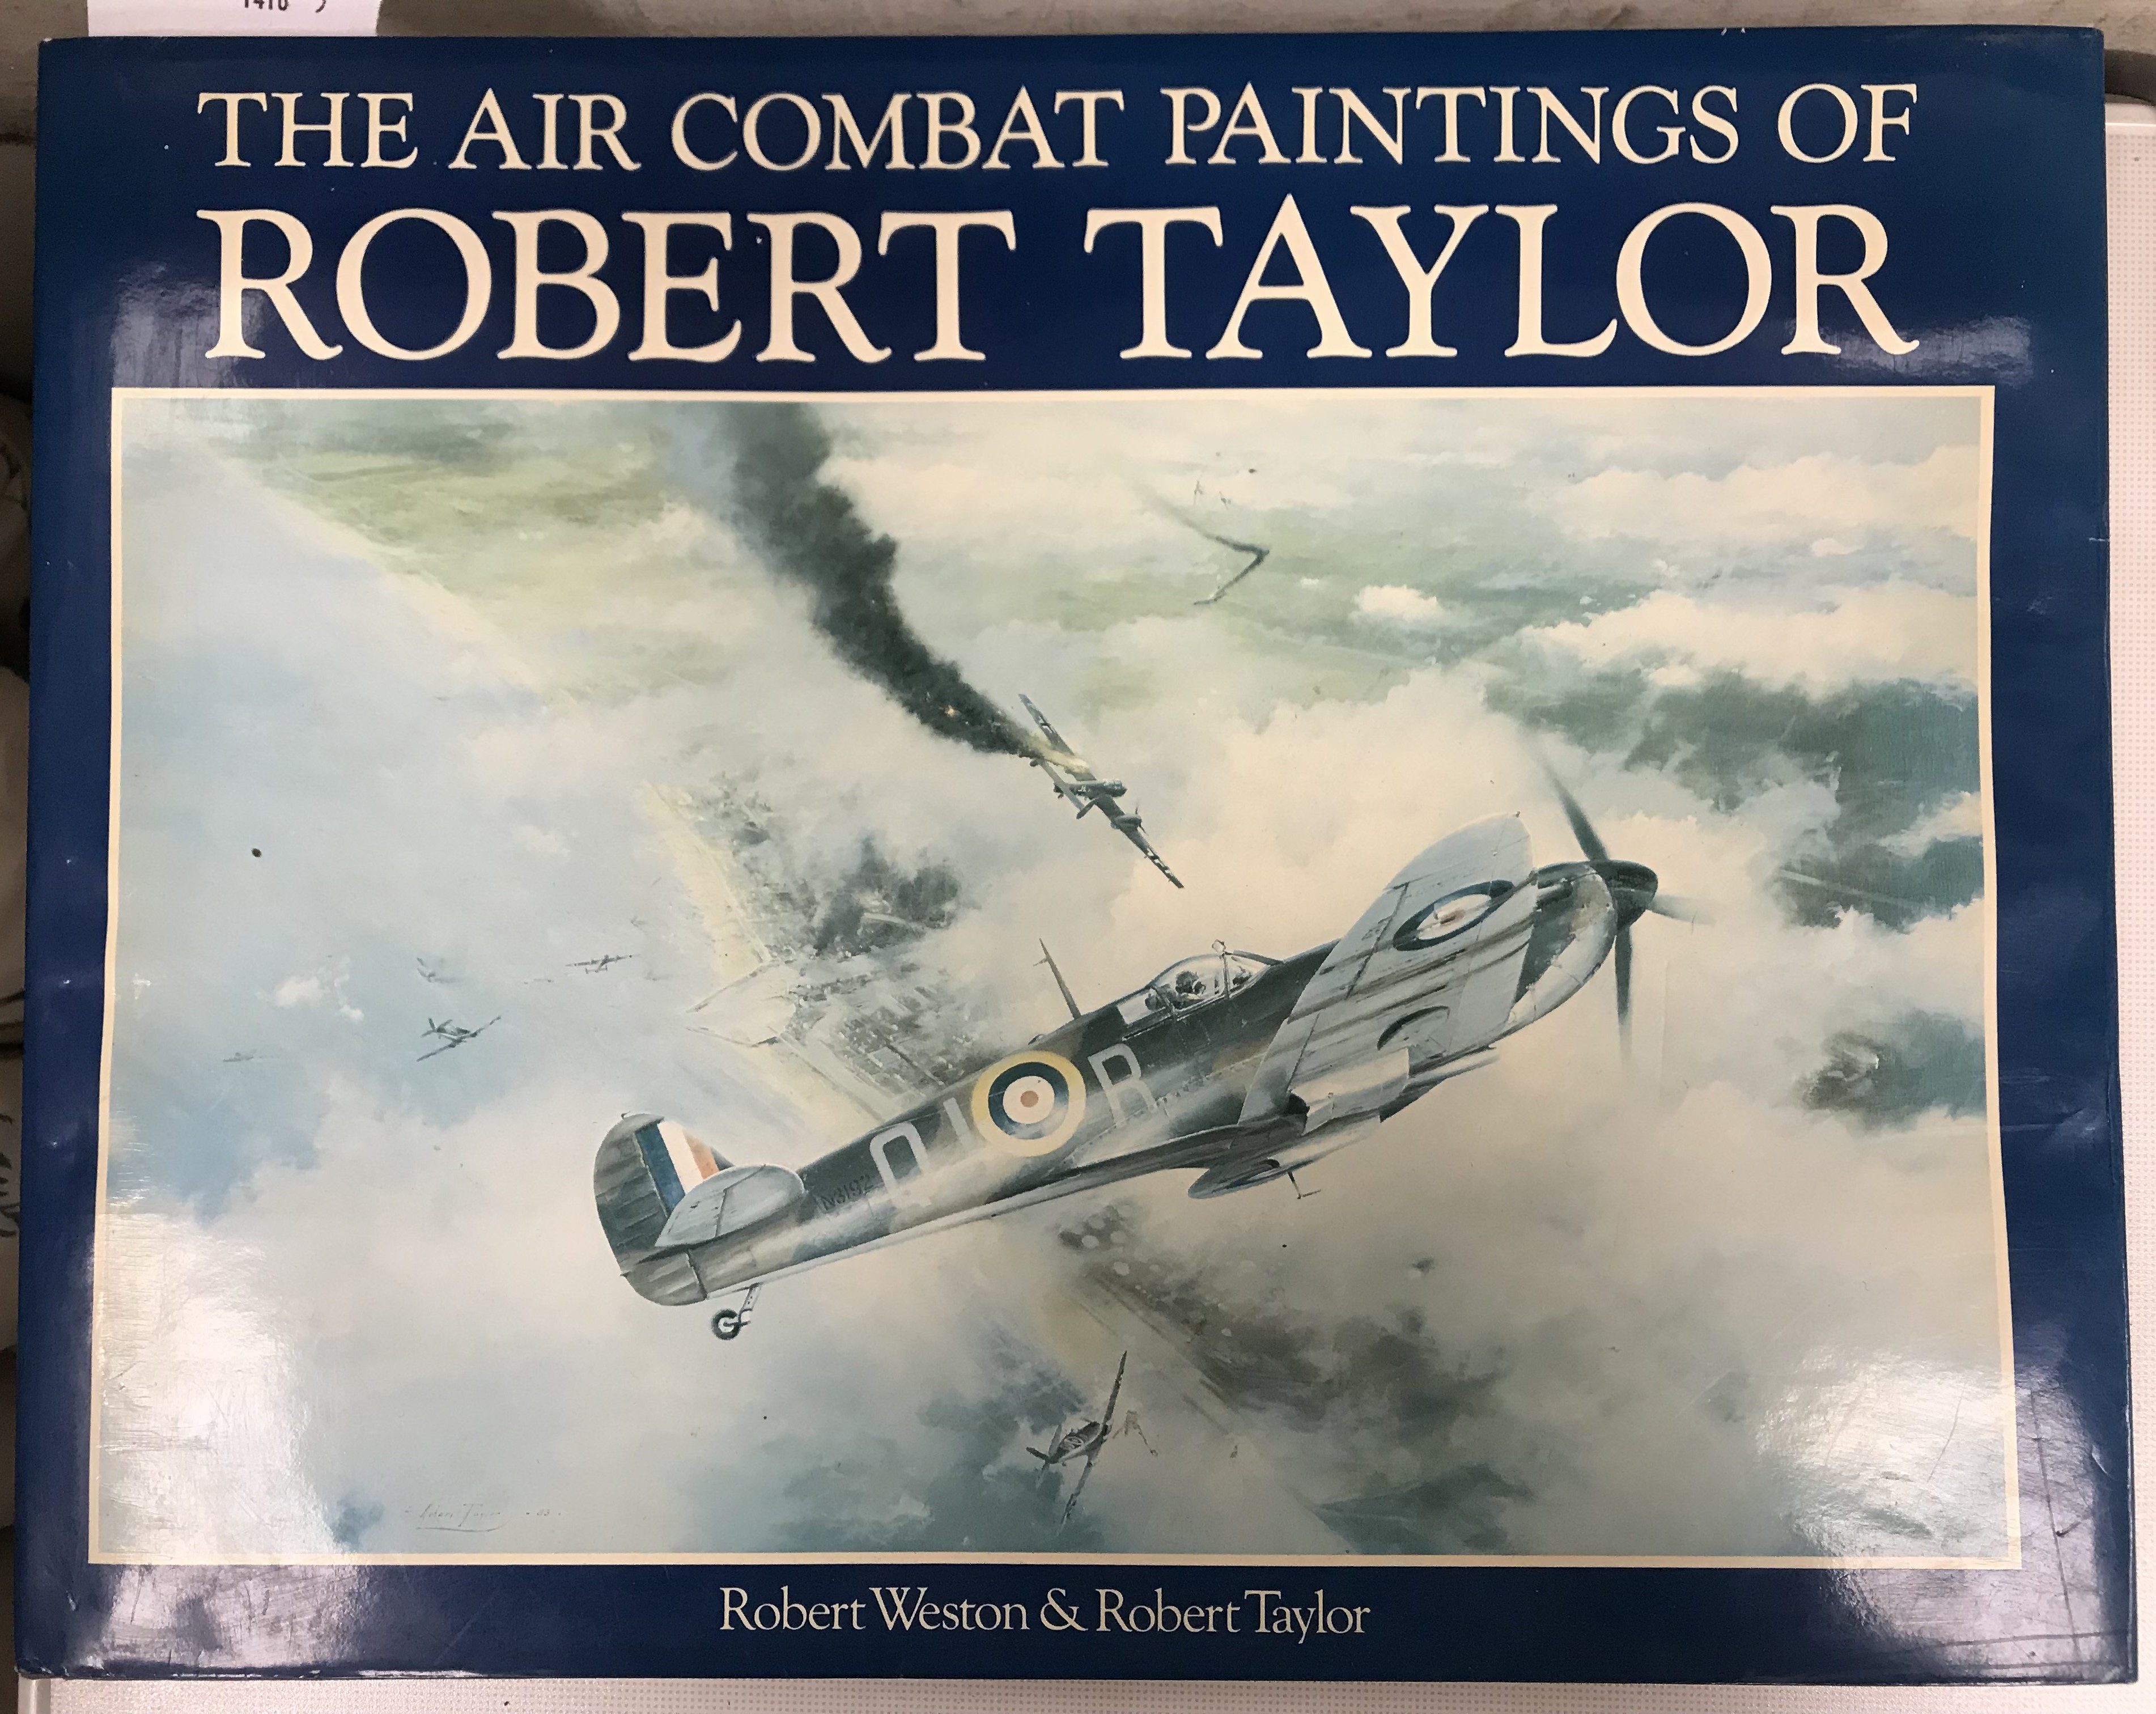 AFTER ROBERT TAYLOR "Memorial flight" colour print, signed by Robert Taylor, Johnnie Johnson CB, - Image 9 of 16